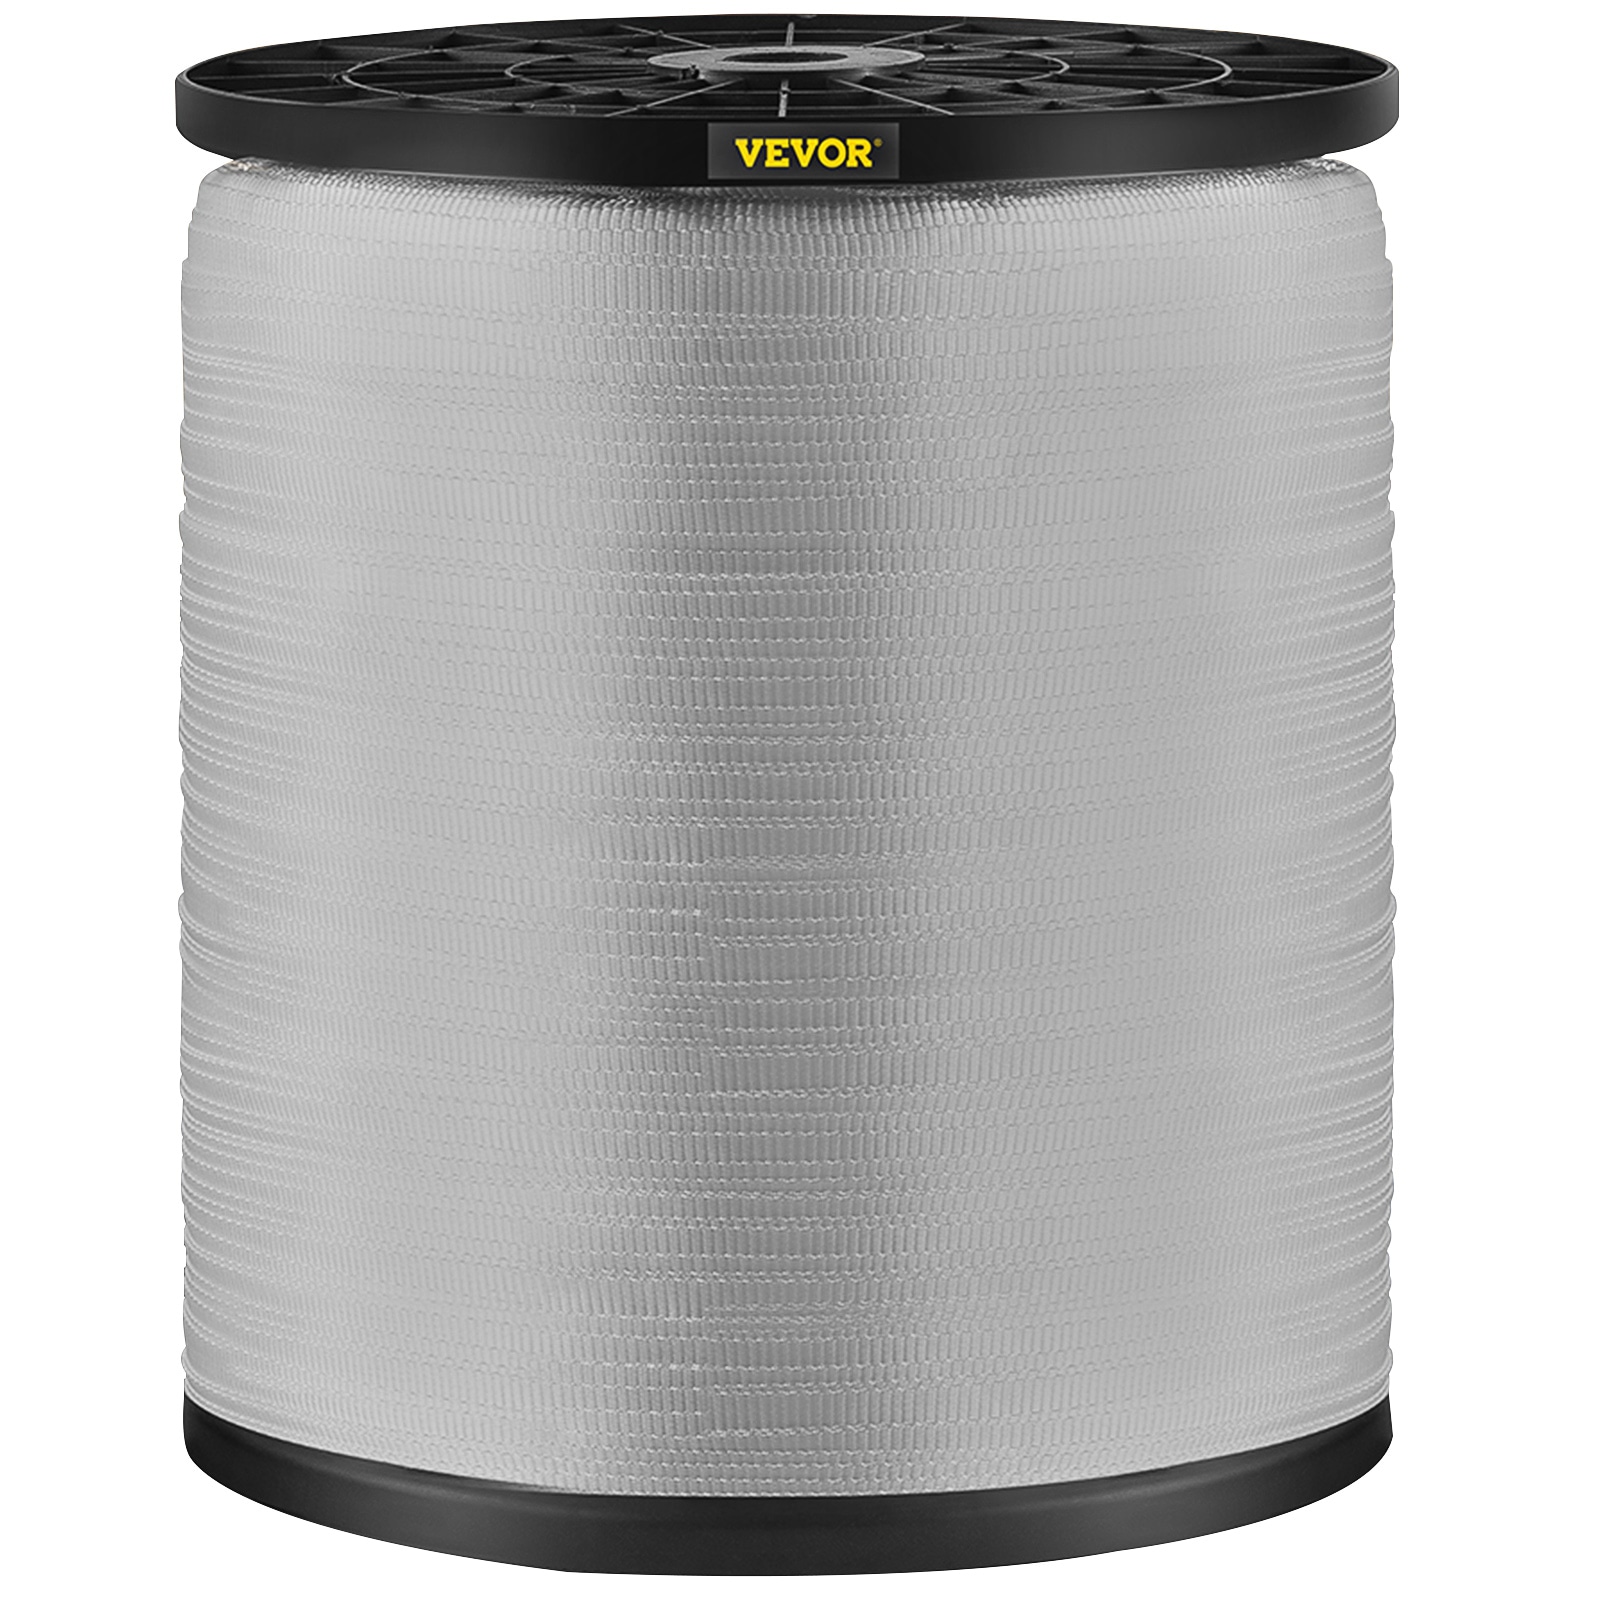 VEVOR 1800Lbs Polyester Pull Tape, 318 ft x 5/8-in Flat Tape for Wire and Cable Conduit Work Variable Functions, Flat Rope for